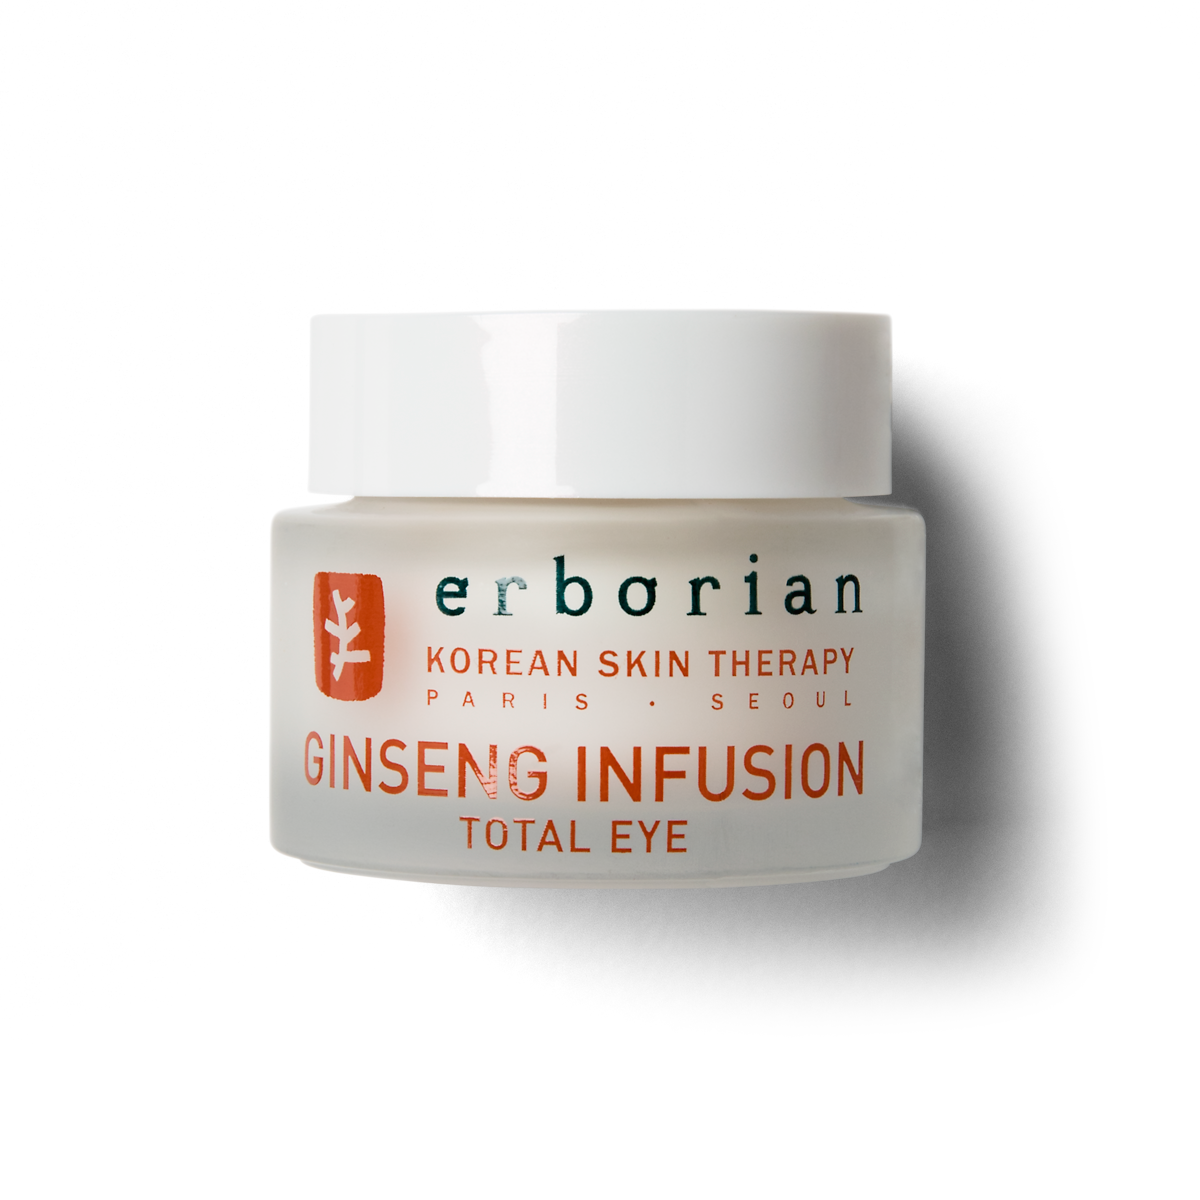 Ginseng Infusion Total Eye Treatment